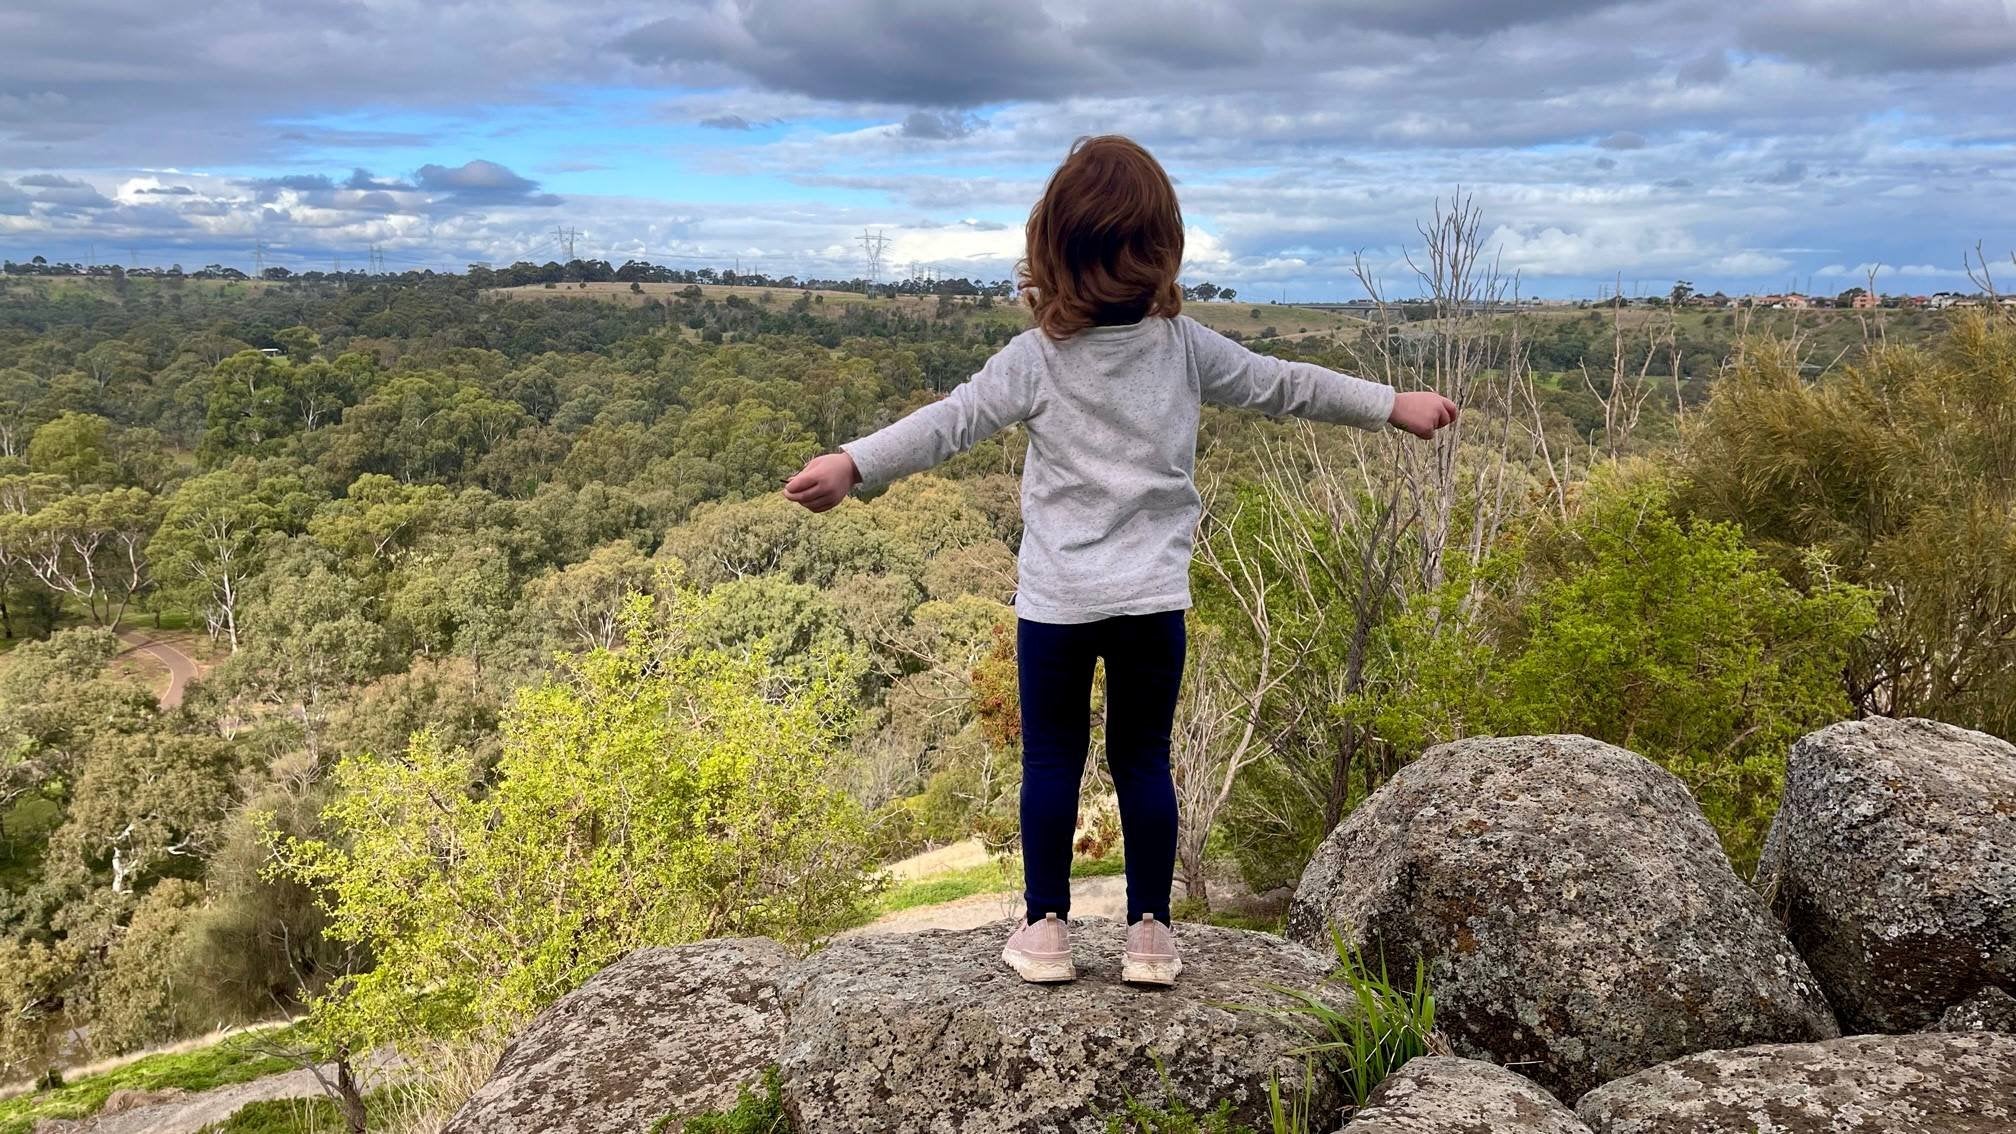 Standing at the top of Brimbank Park